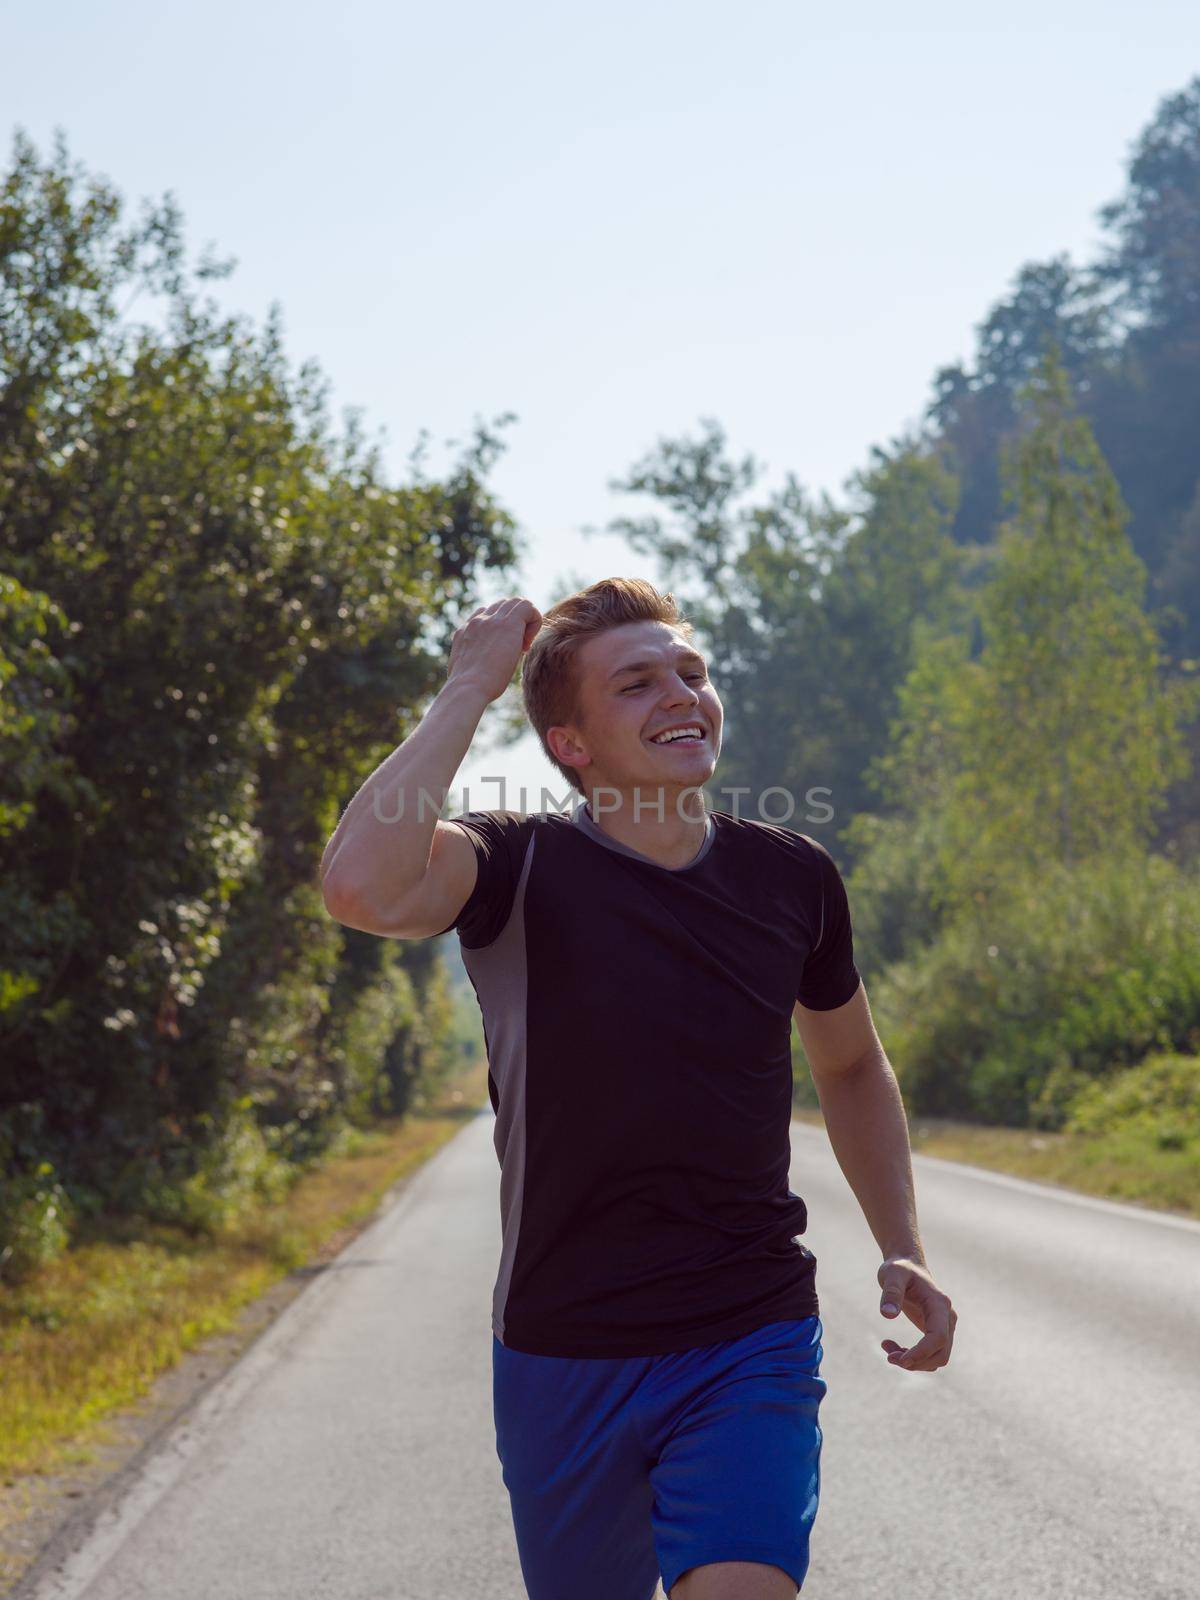 young man enjoying in a healthy lifestyle while jogging along a country road, exercise and fitness concept